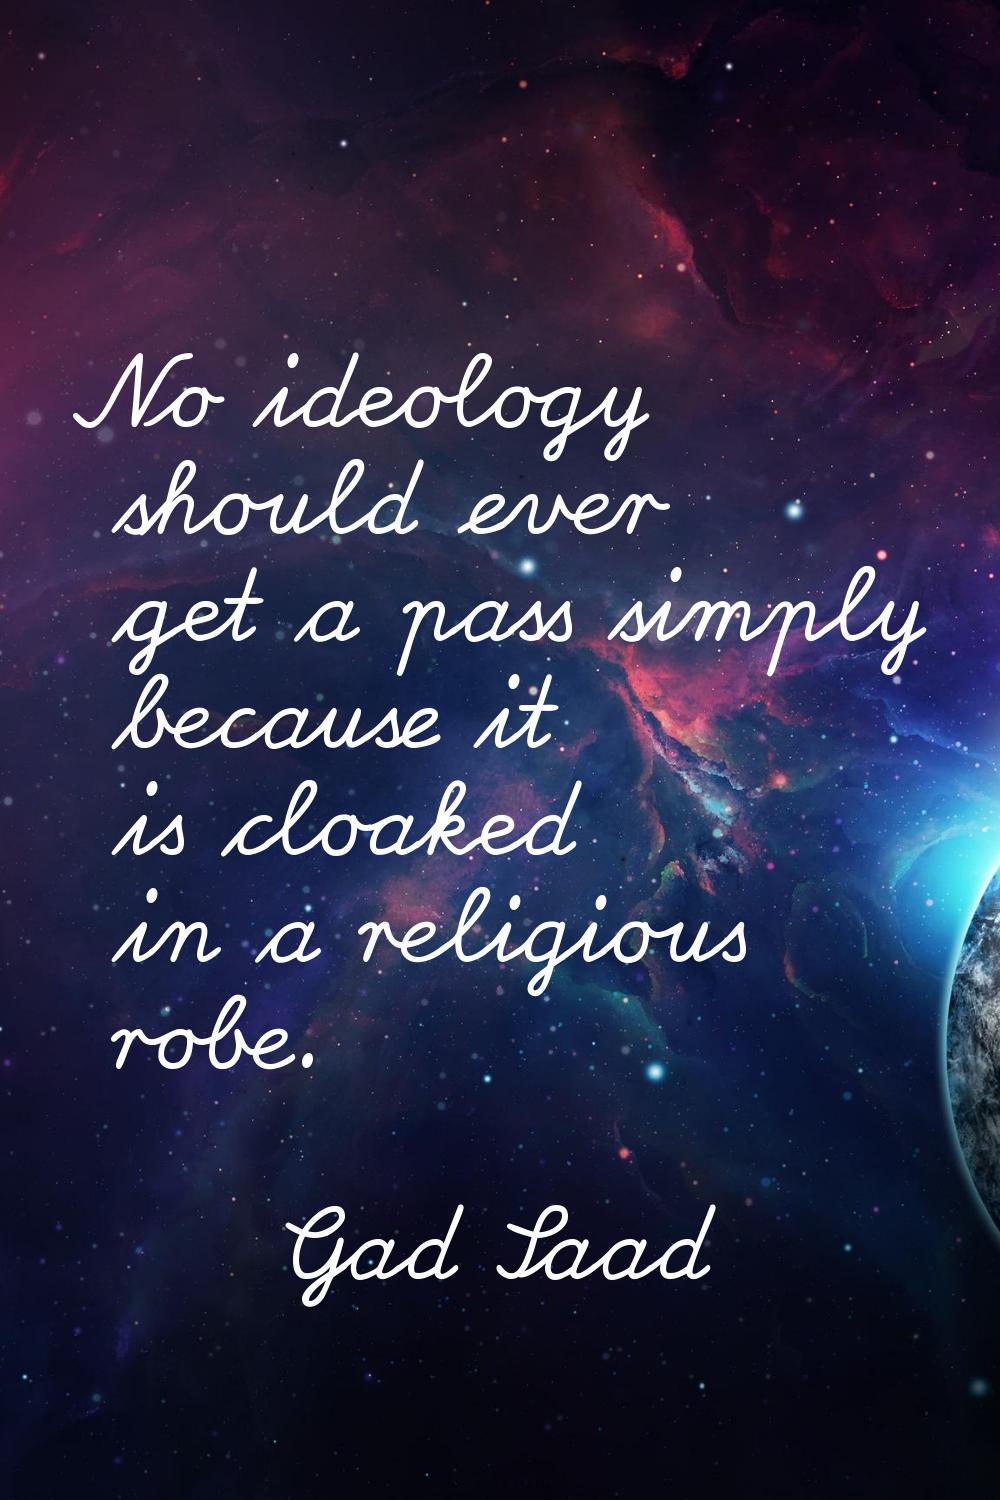 No ideology should ever get a pass simply because it is cloaked in a religious robe.